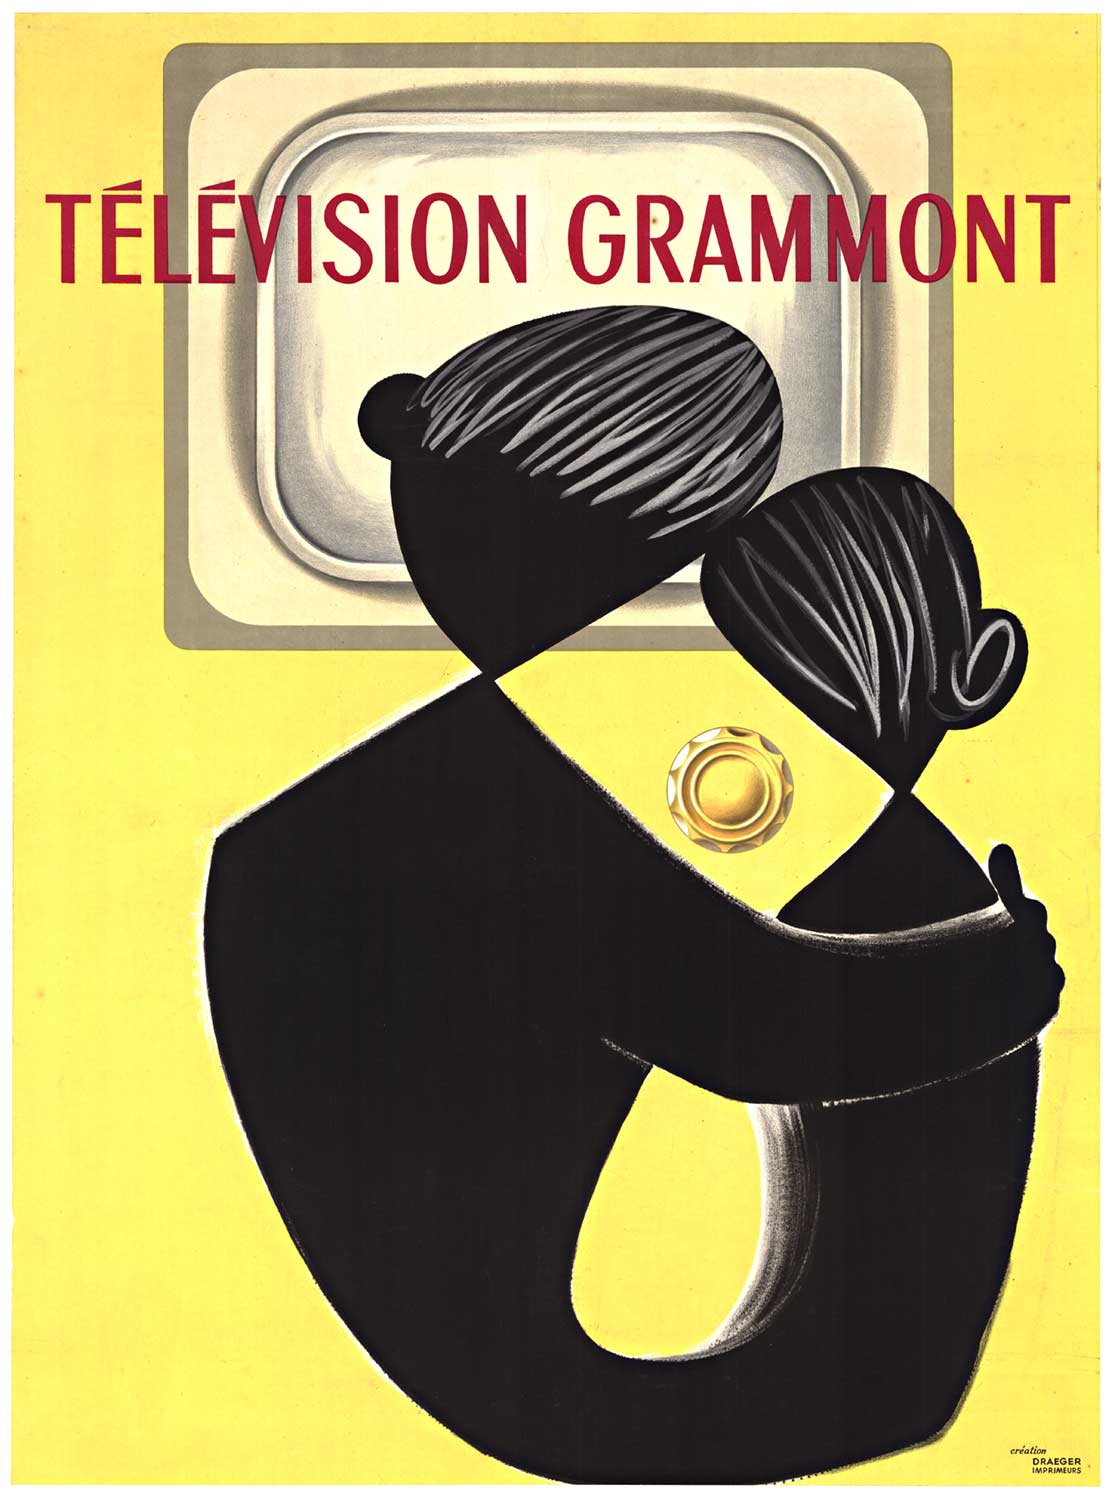 TELEVISION GRAMMONT, printer: Draeger. Size 23.75" x 32". Original lithograph. Archival linen backed in excellent condition; ready to frame. <br> <br>This poster is a French advertisement for a company that made both television sets and gramophon